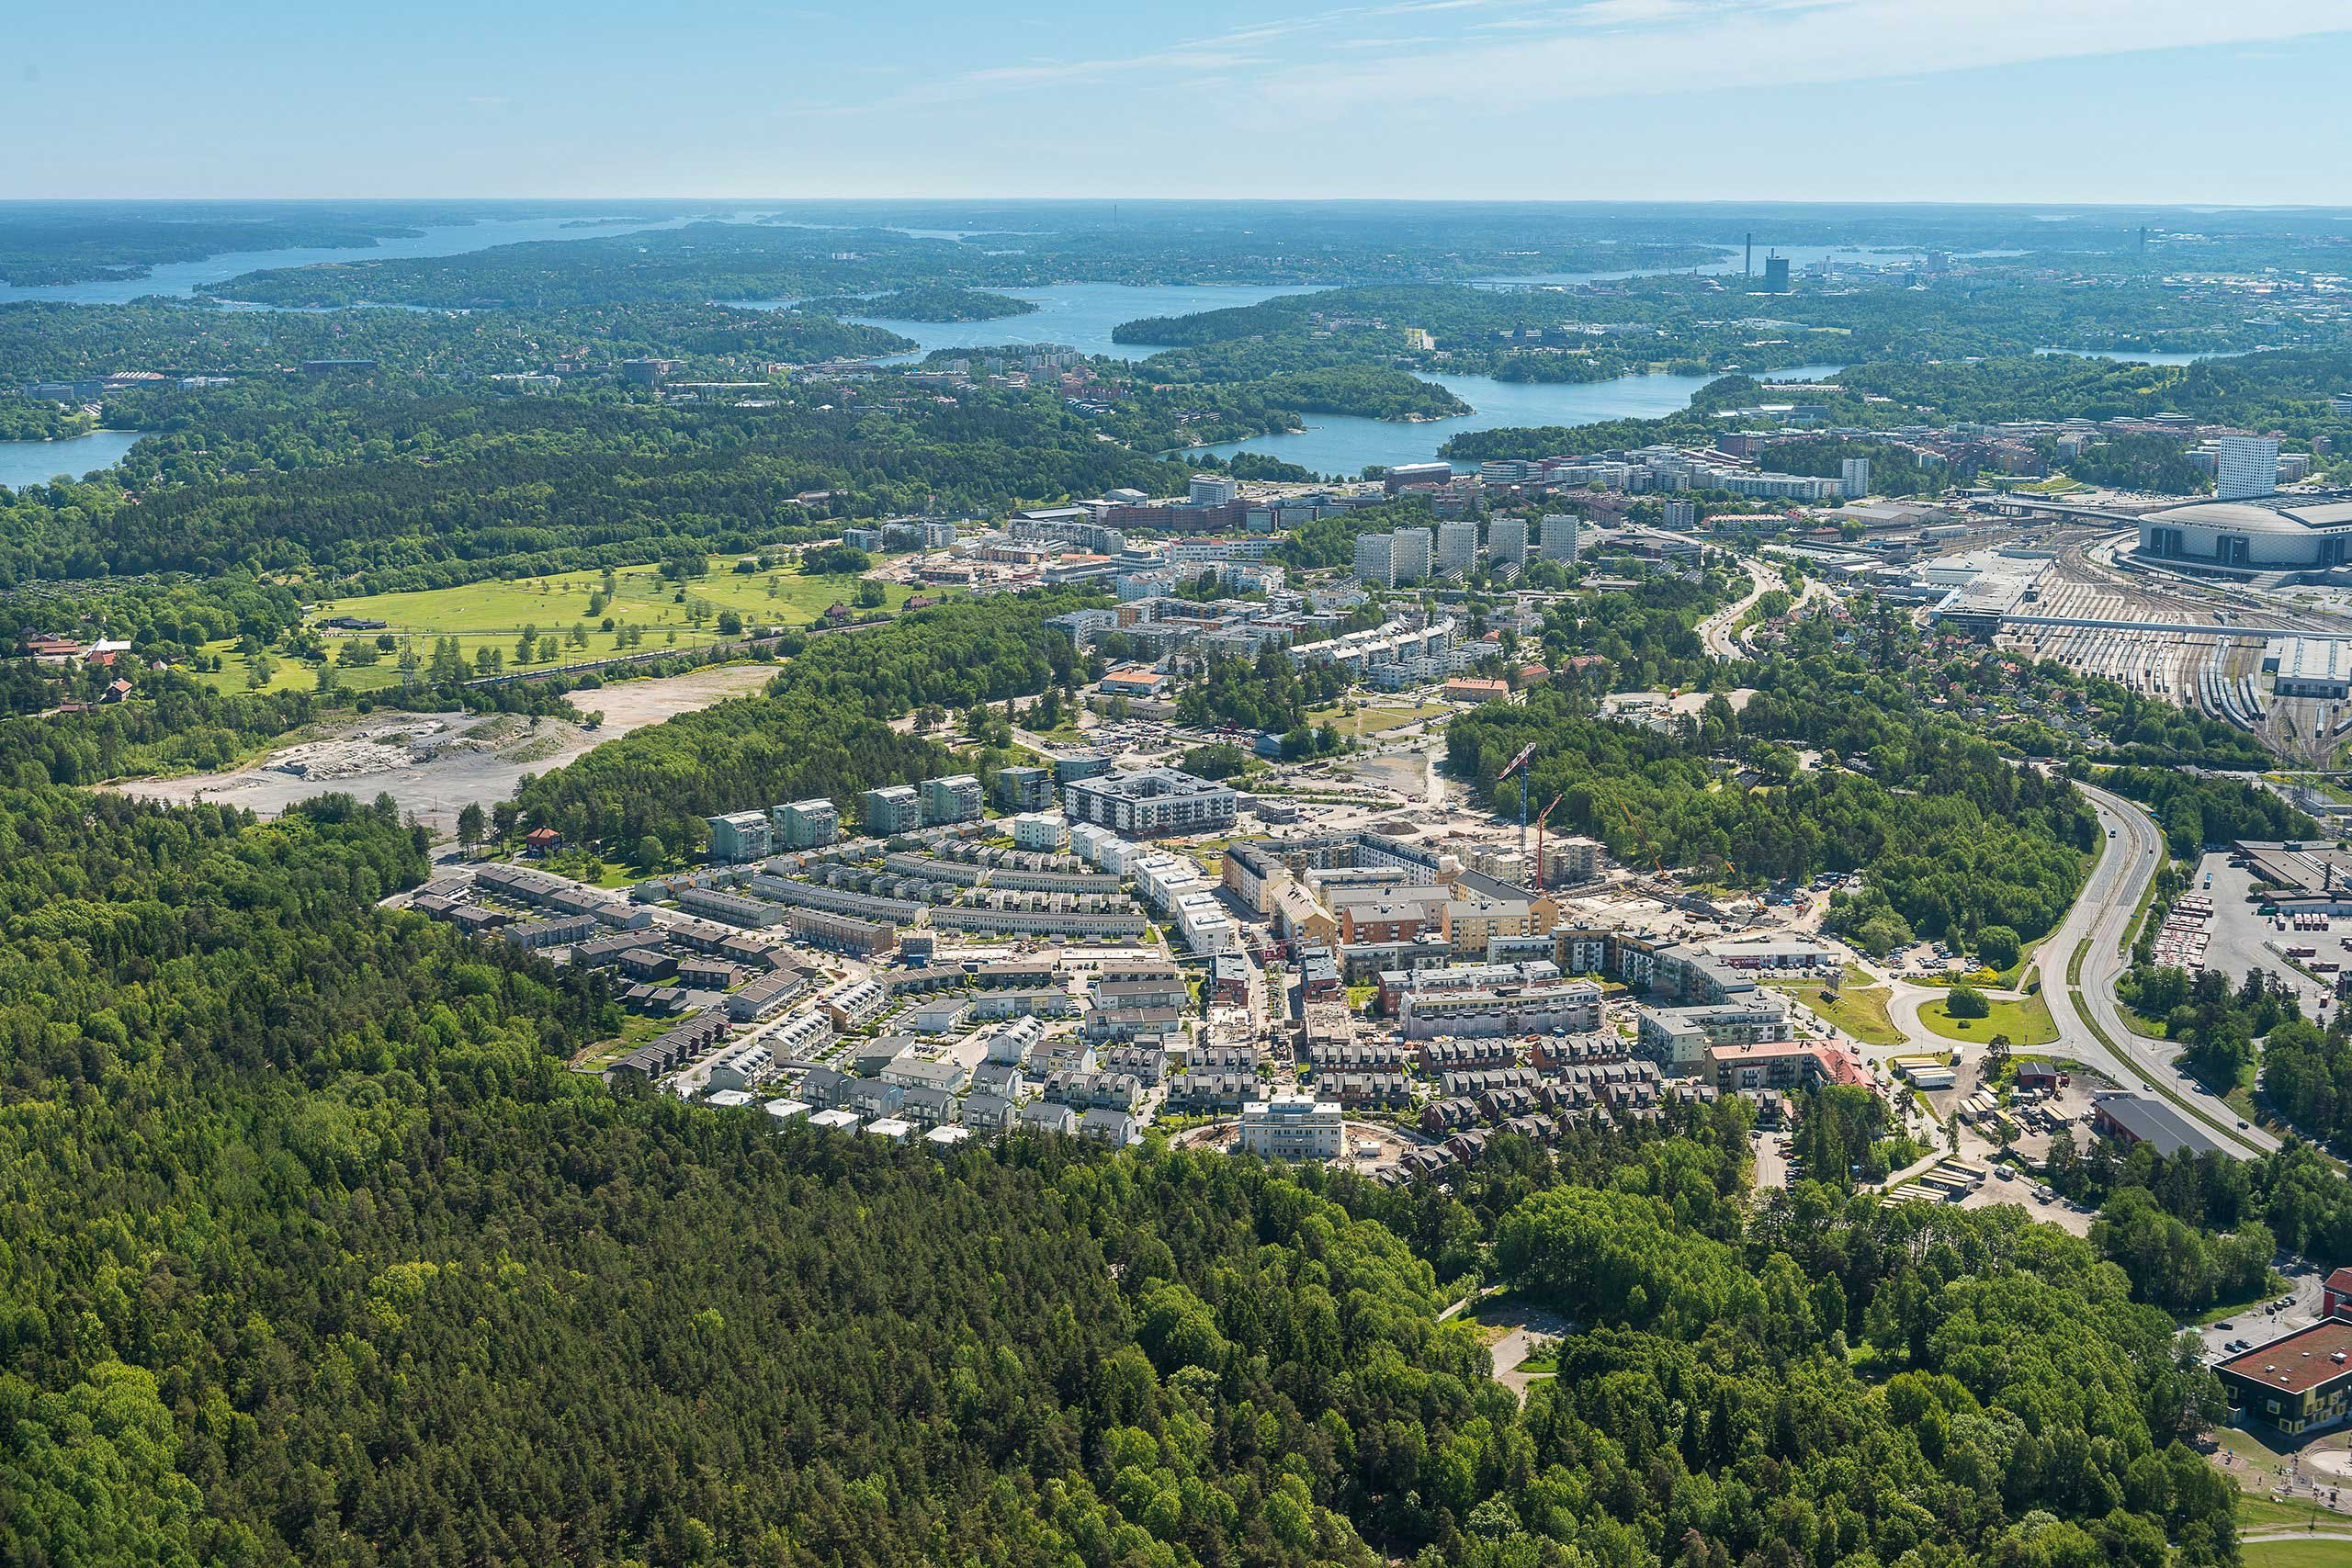 Sale of residential building rights in Solna